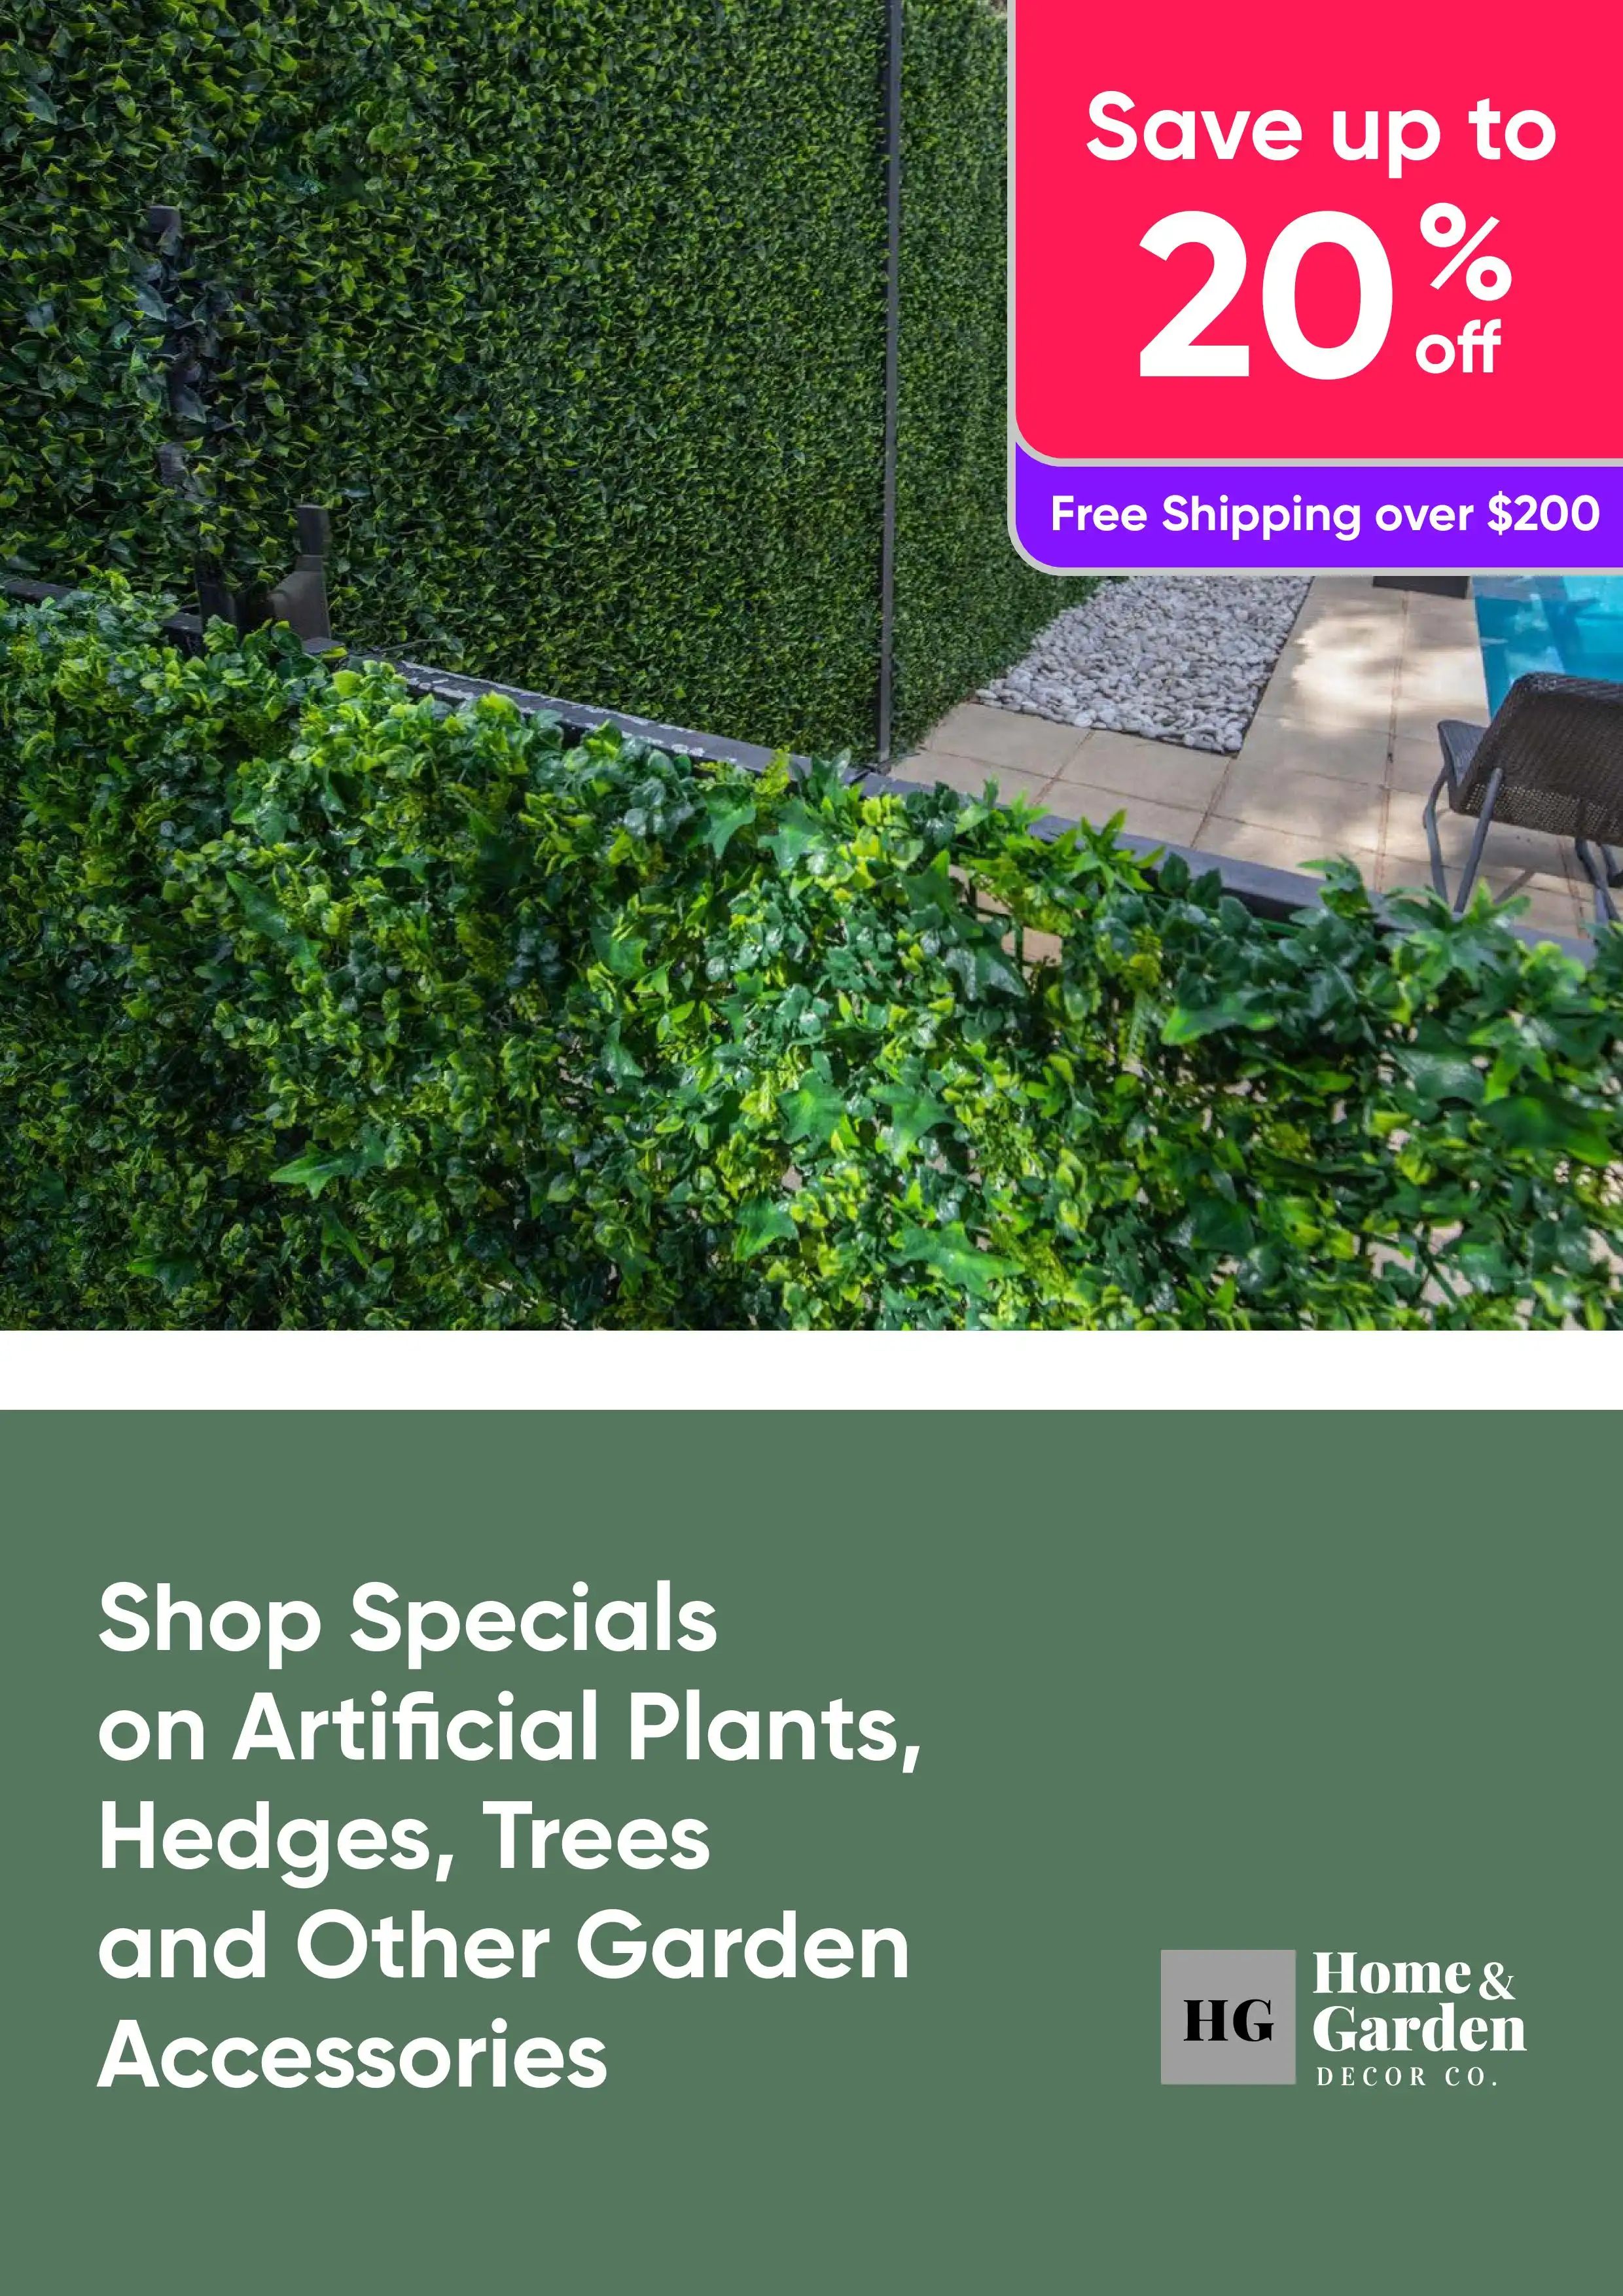 Shop Specials on Artificial Plants, Hedges, Trees and Other Garden Accessories Up to 20% Off